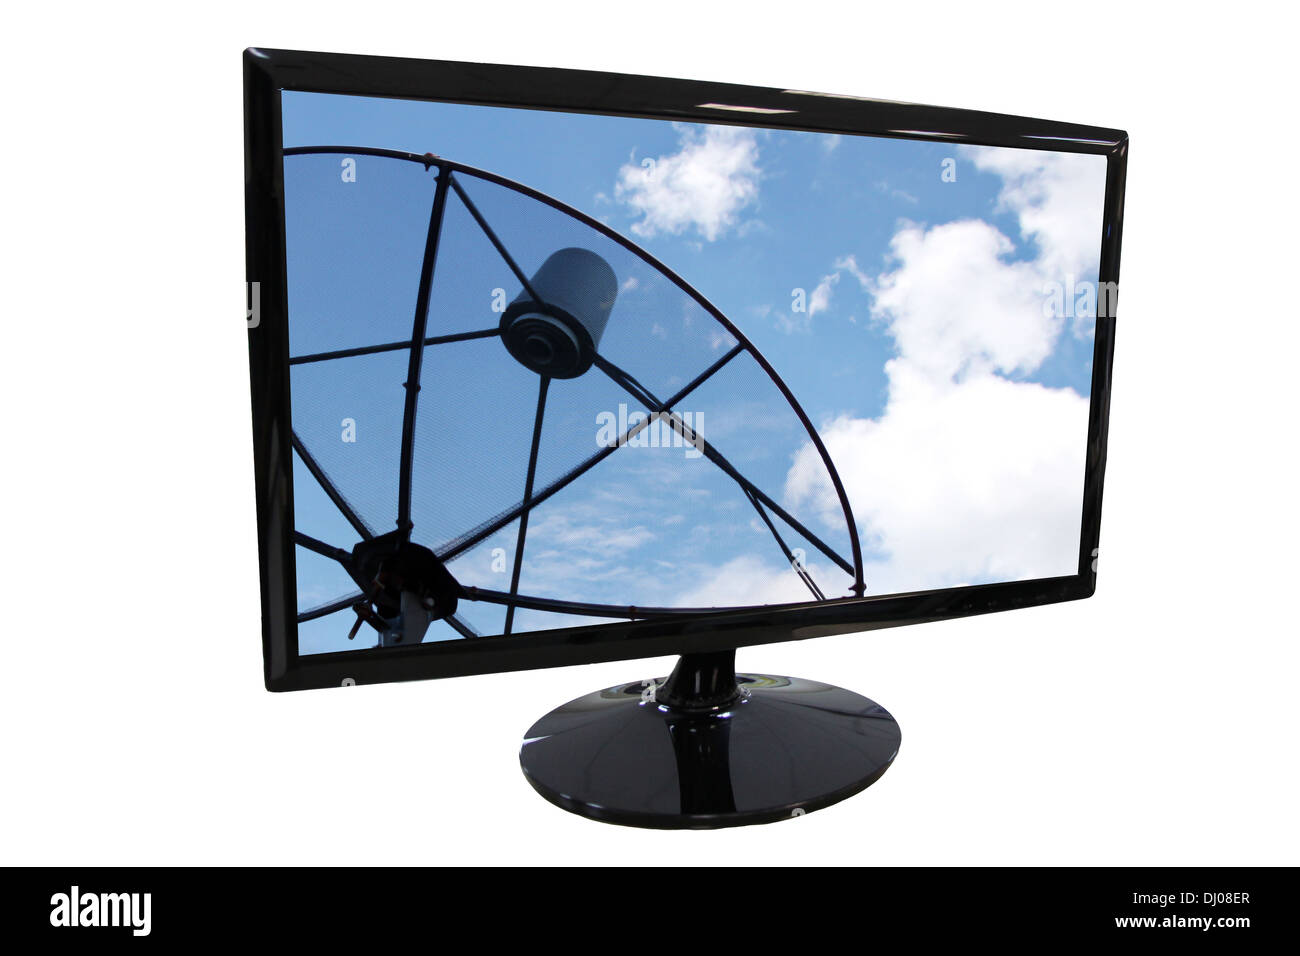 Frame LED computer and Satellite dish screen on white background. Stock Photo